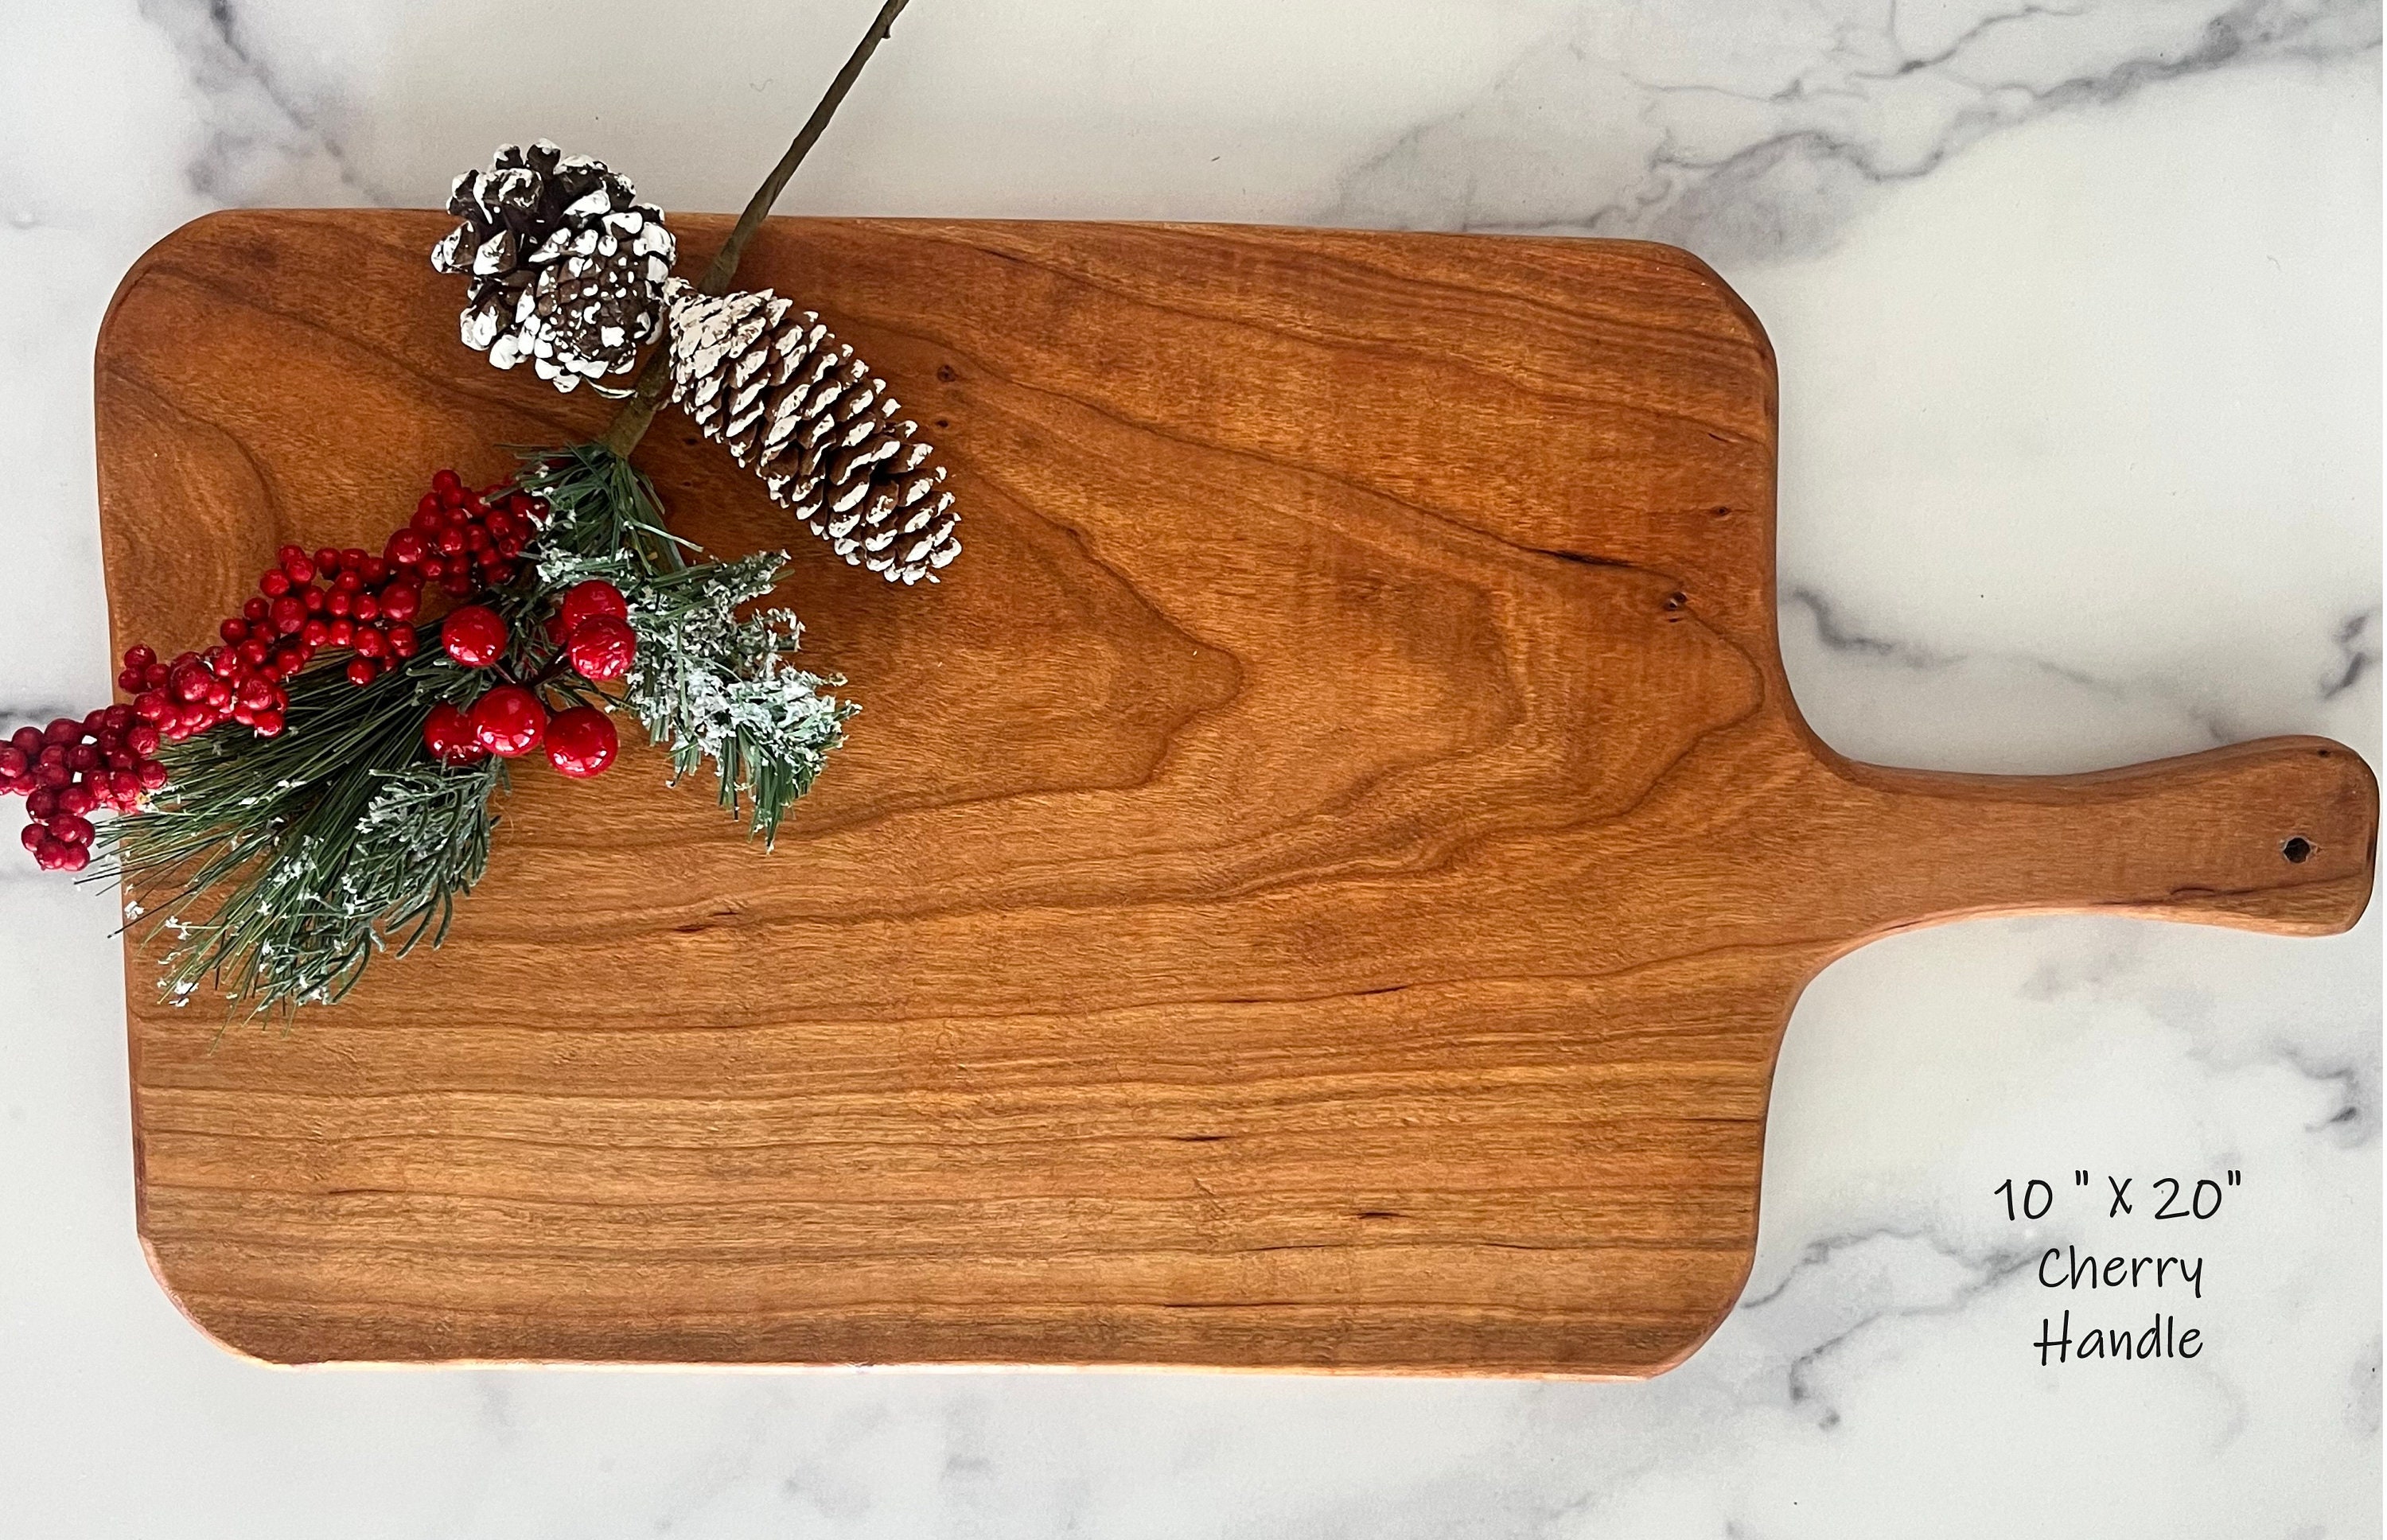 Solid ONE Piece Natural, NON-TOXIC, Chemical Free Wood Organic Cutting/charcuterie  Board in Maple, Oak, Cherry or Walnut 